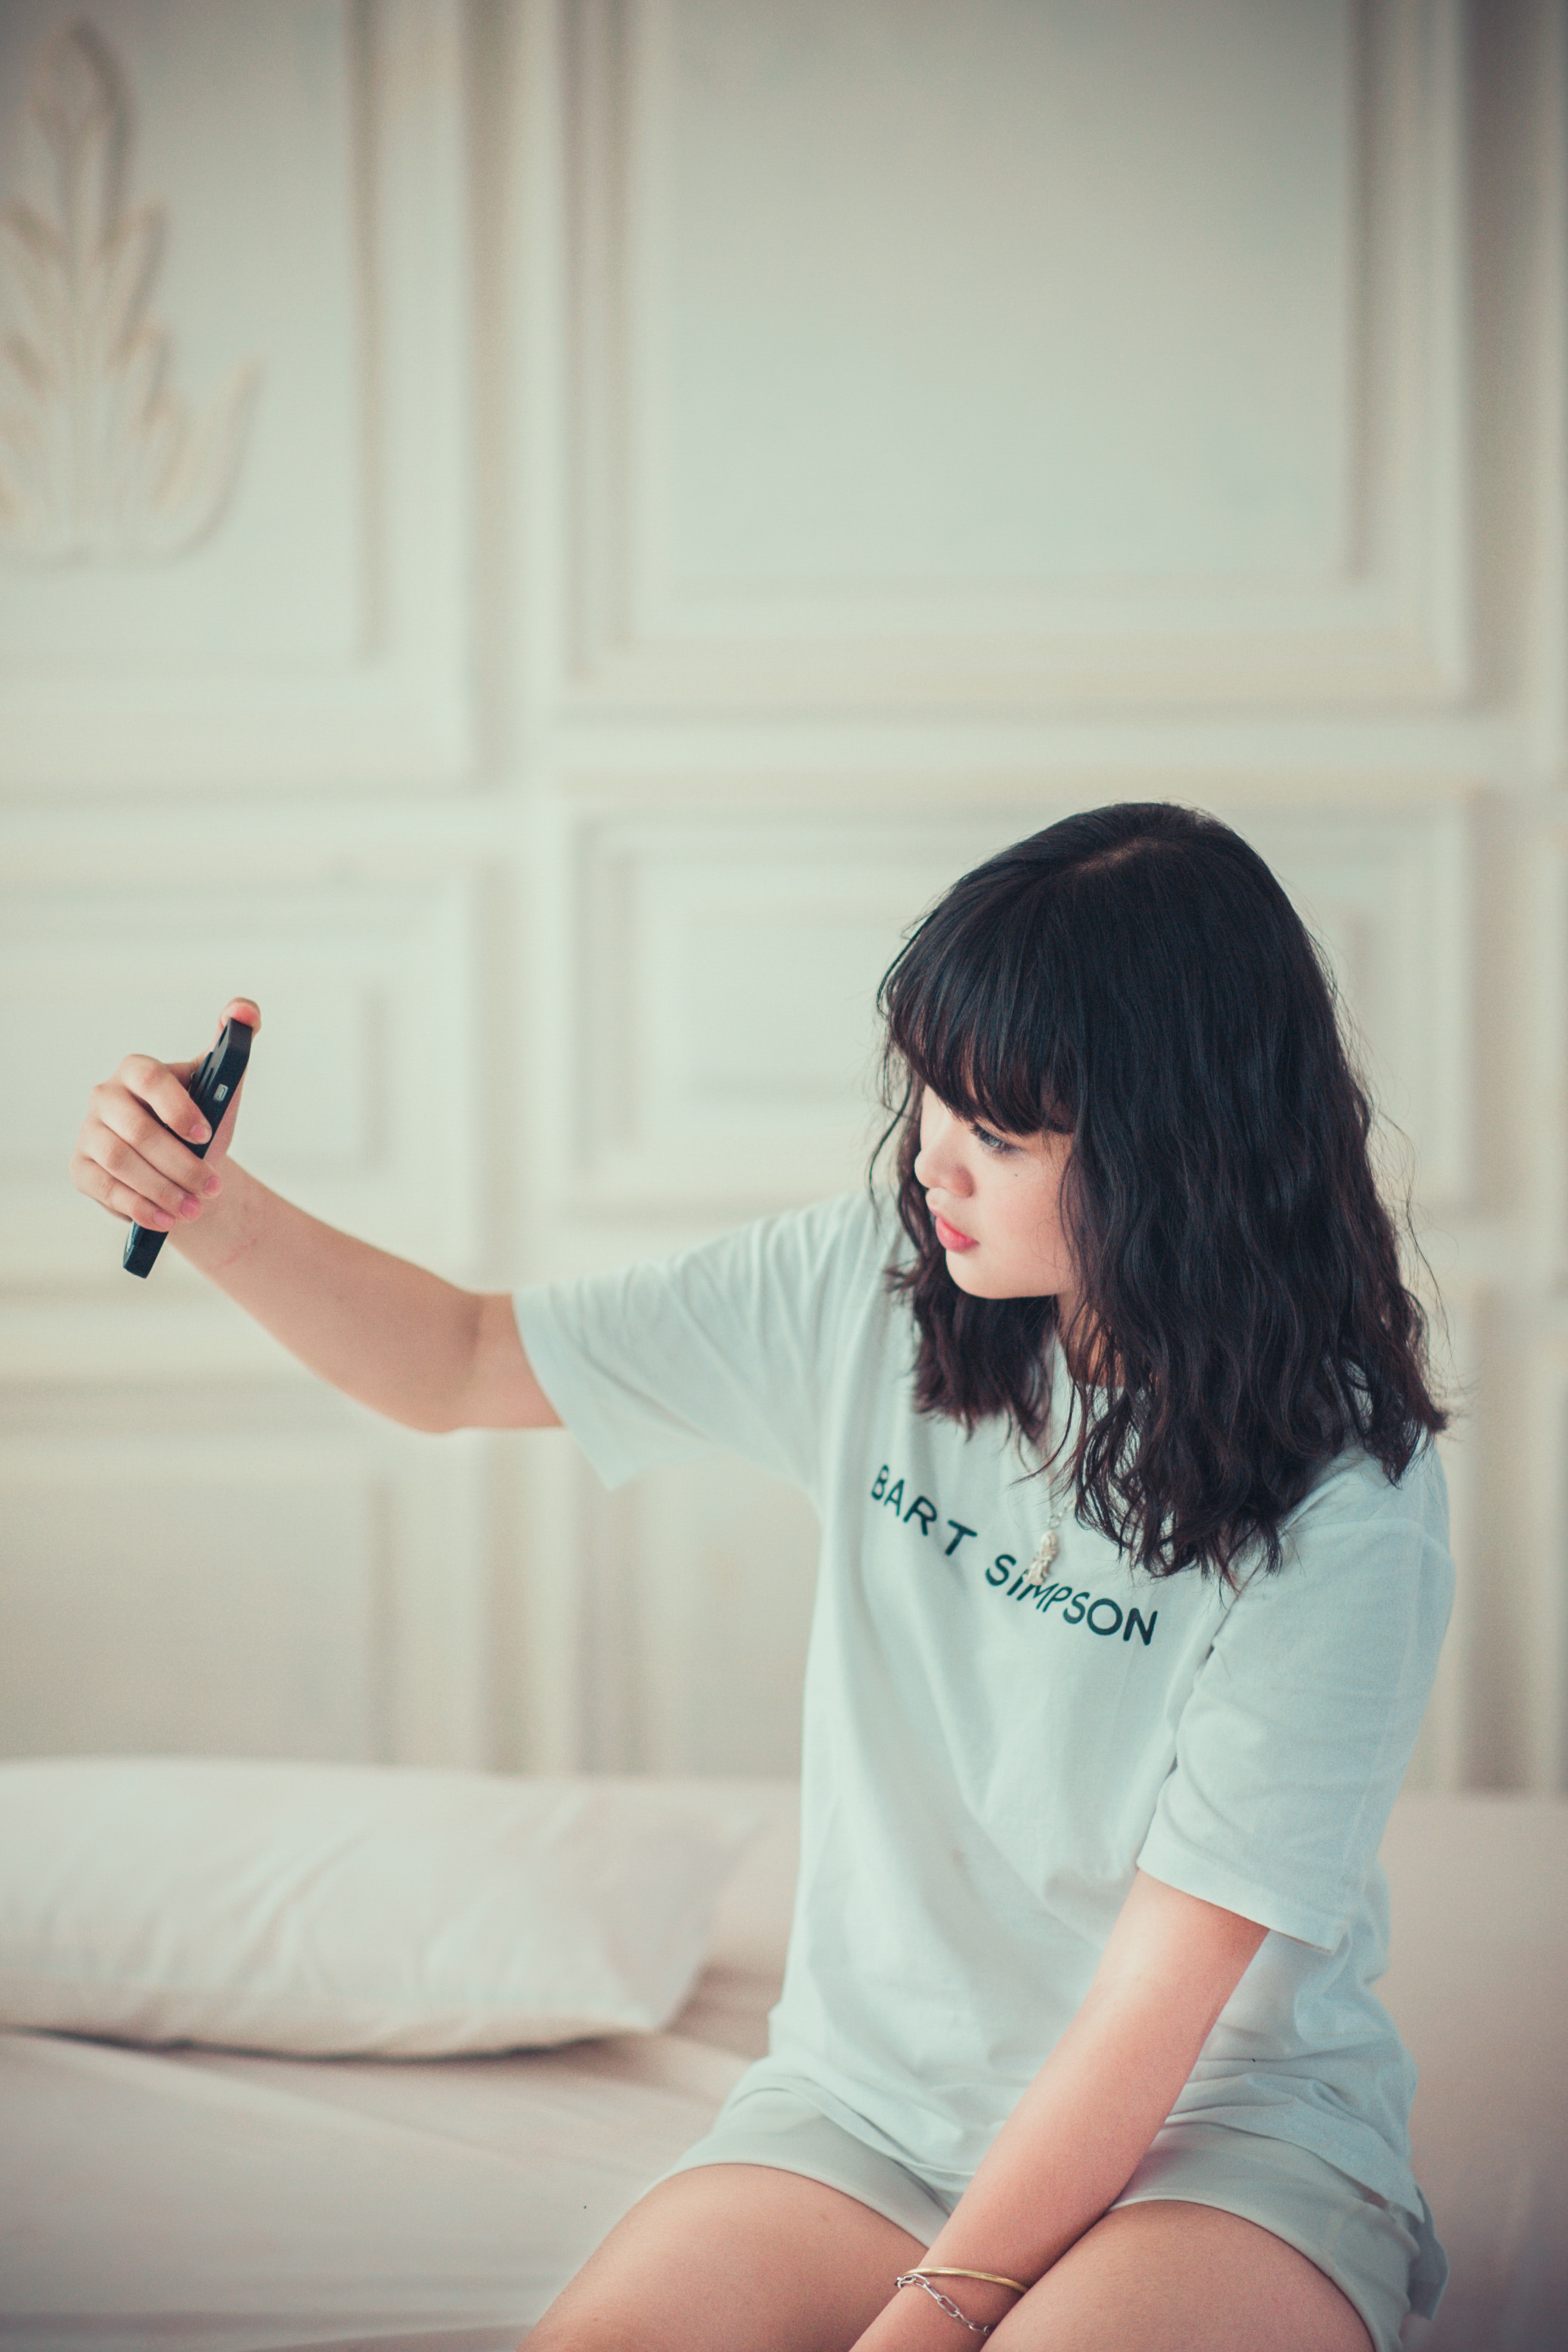 Girl in Blue Crew Neck Shirt Using Her Mobile Phone Indoors, Smile, Pretty, Relax, Relaxation, HQ Photo